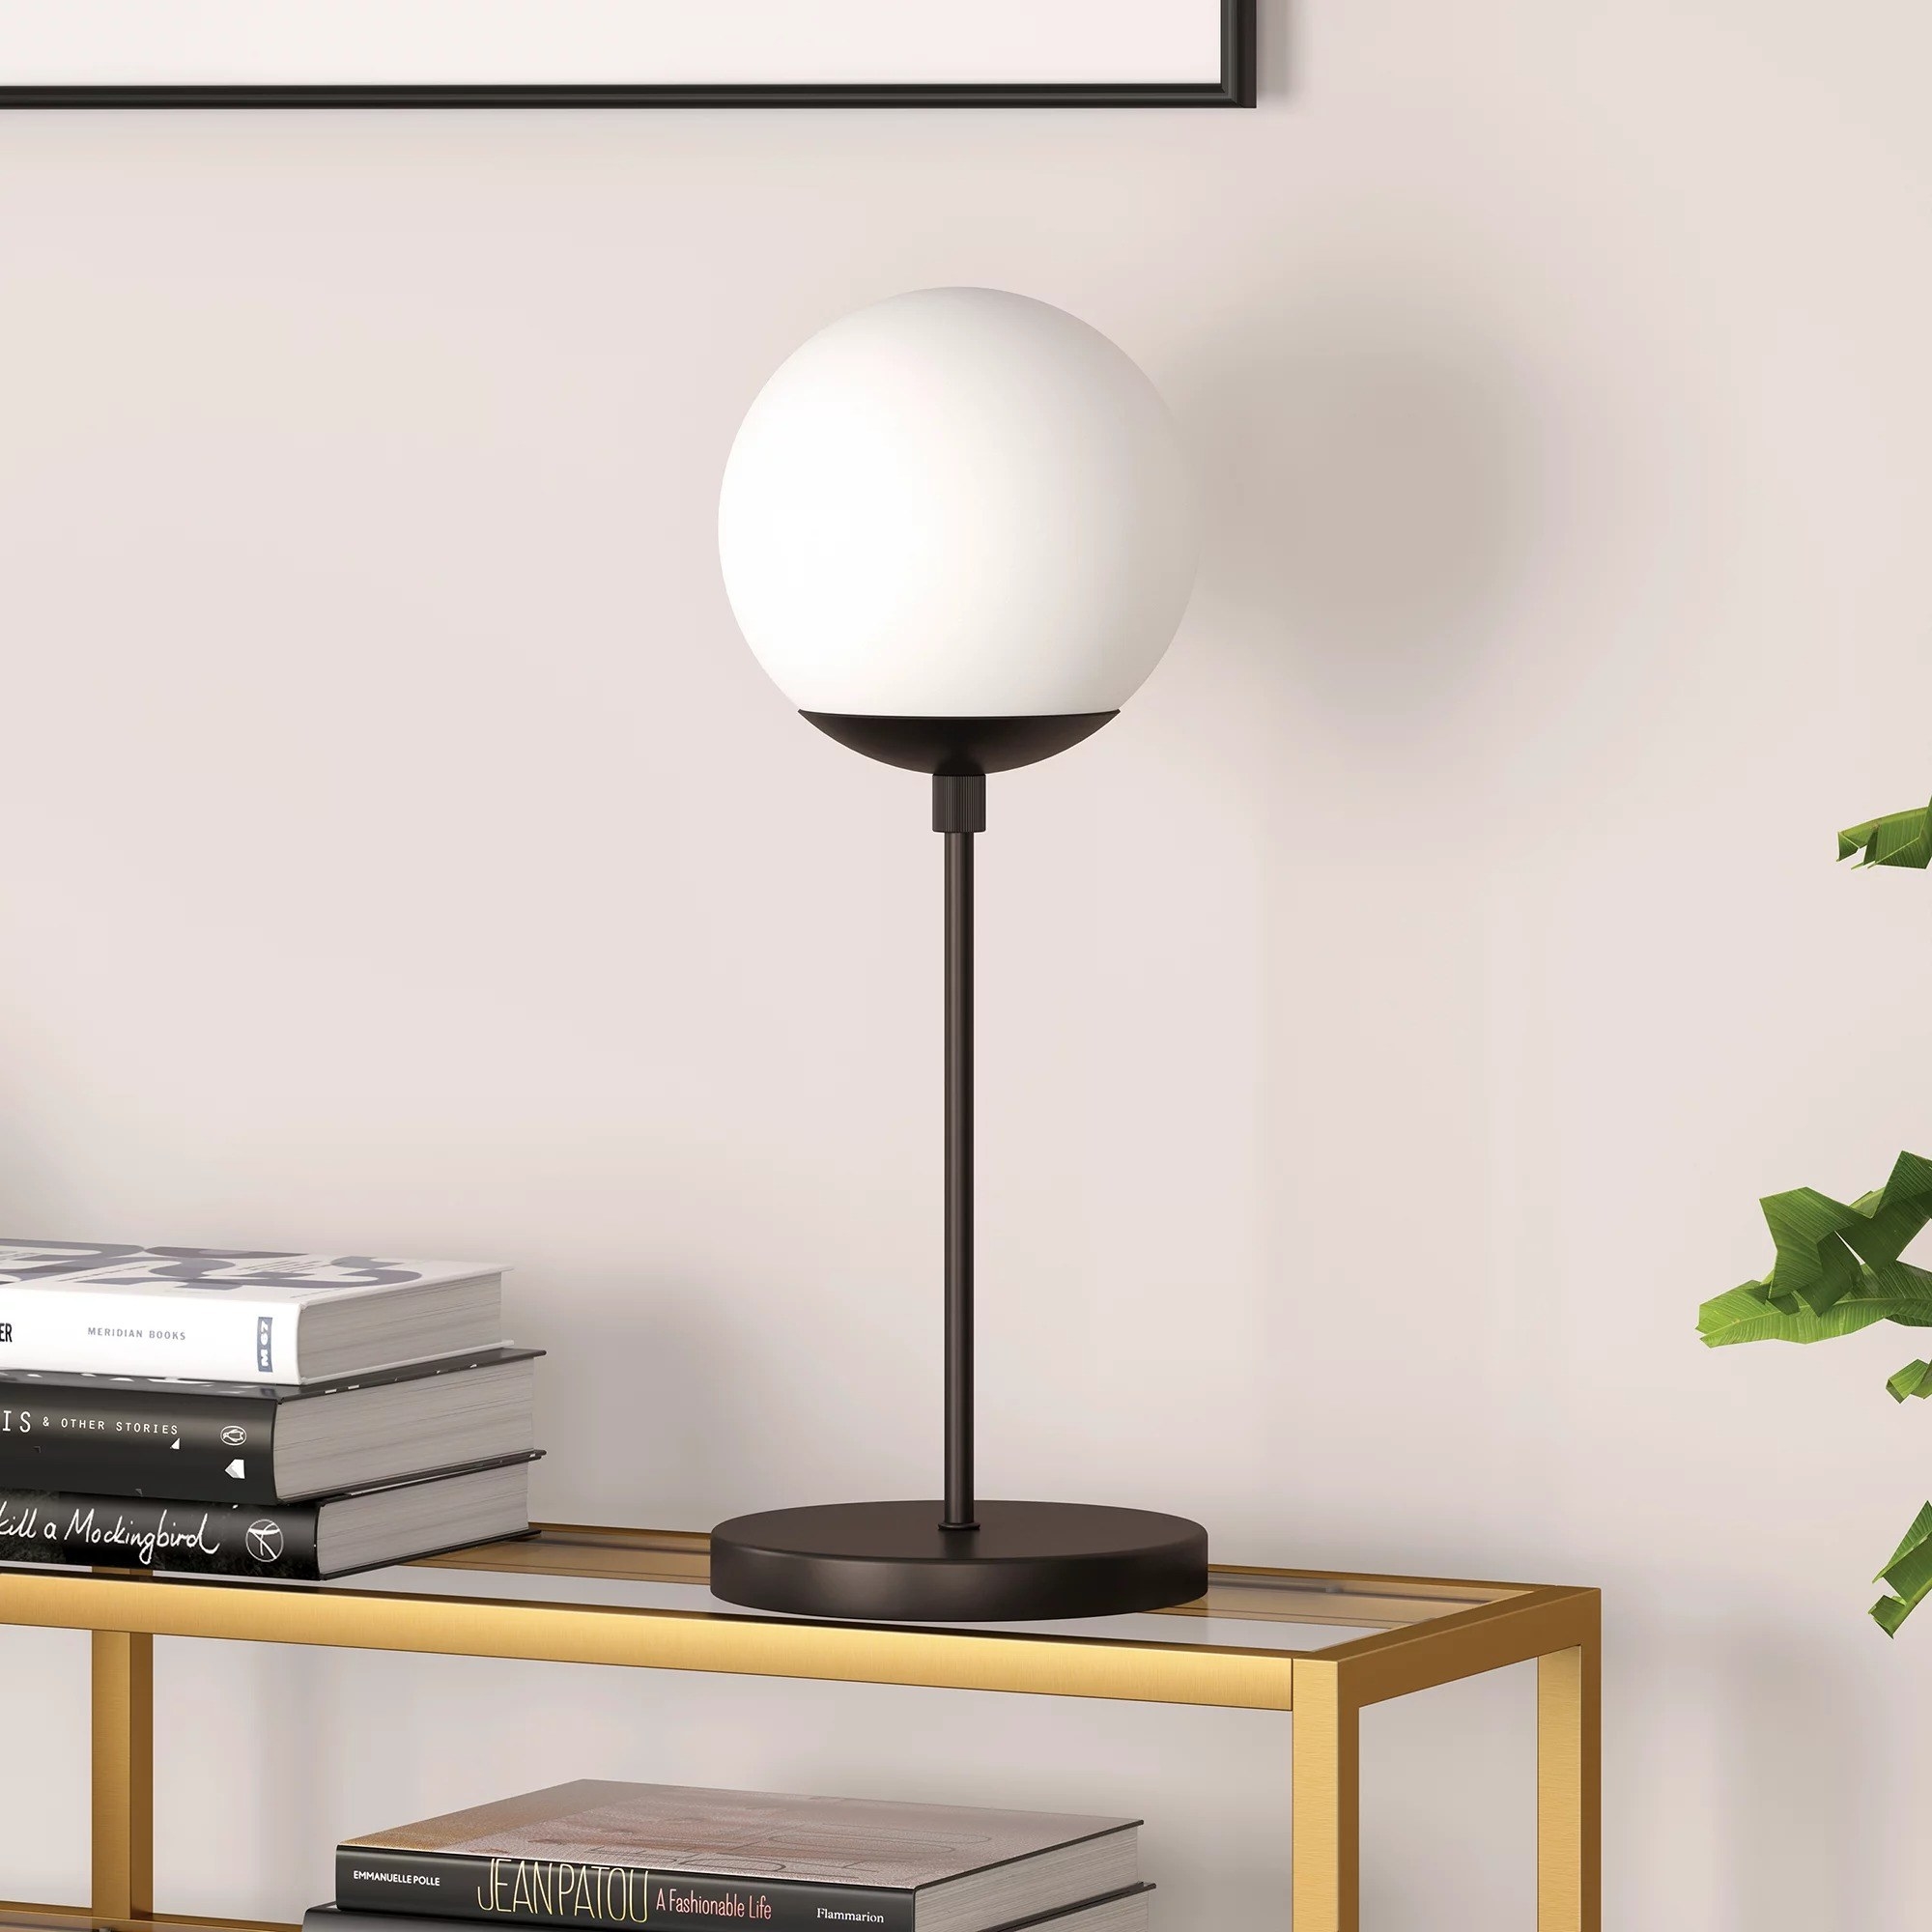 Black globe lamp with large round white top